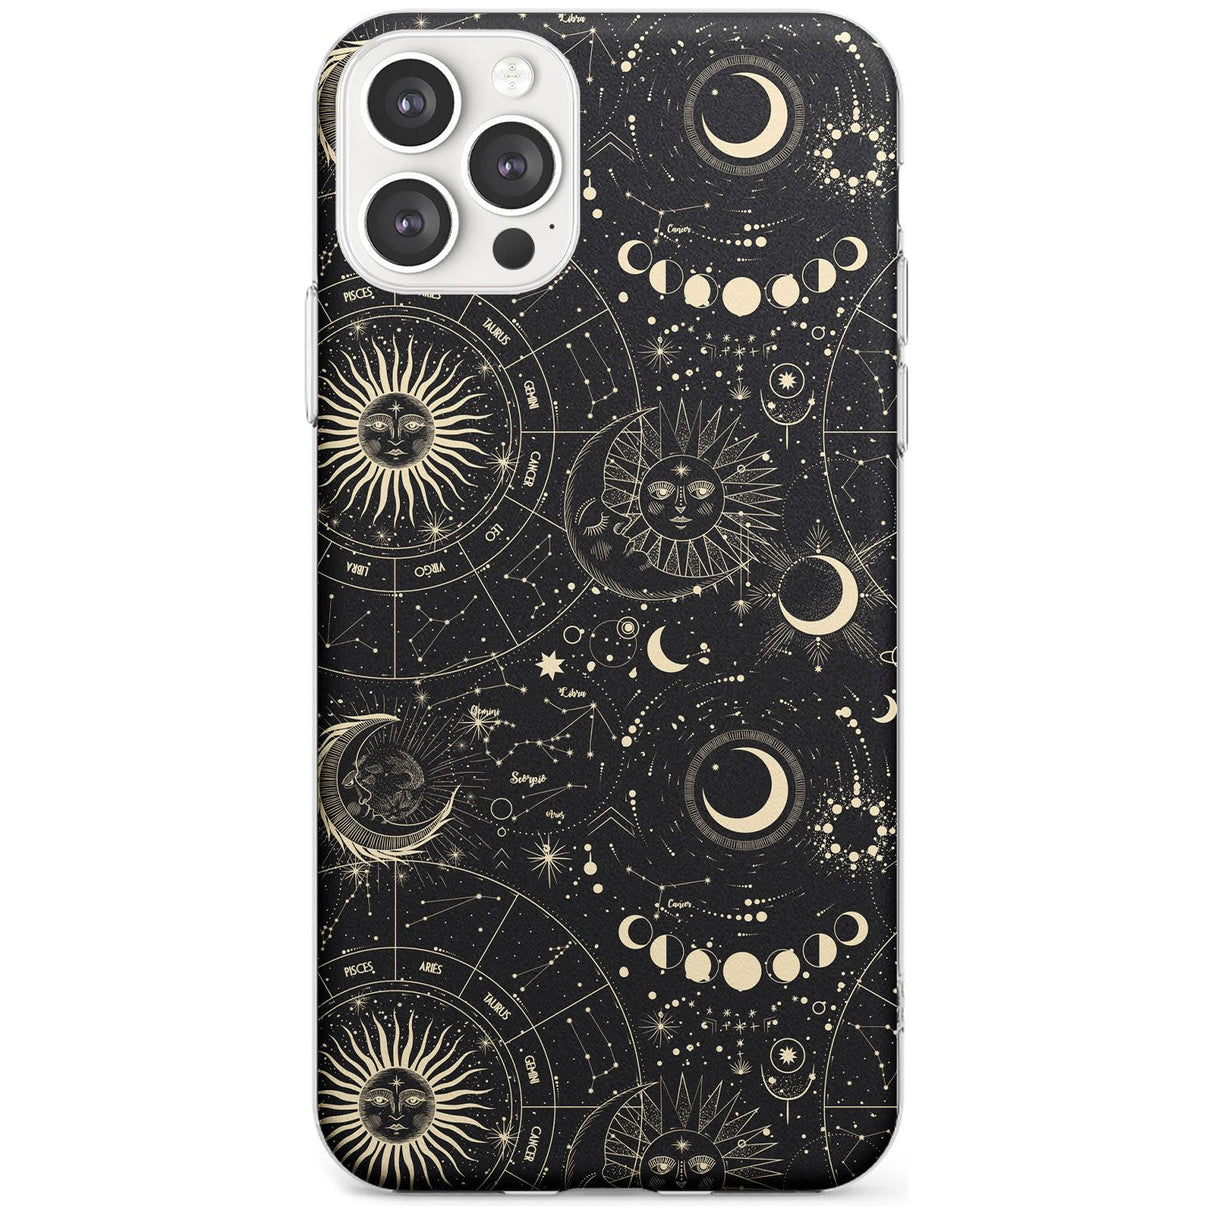 Suns, Moons & Star Signs Black Impact Phone Case for iPhone 11 Pro Max